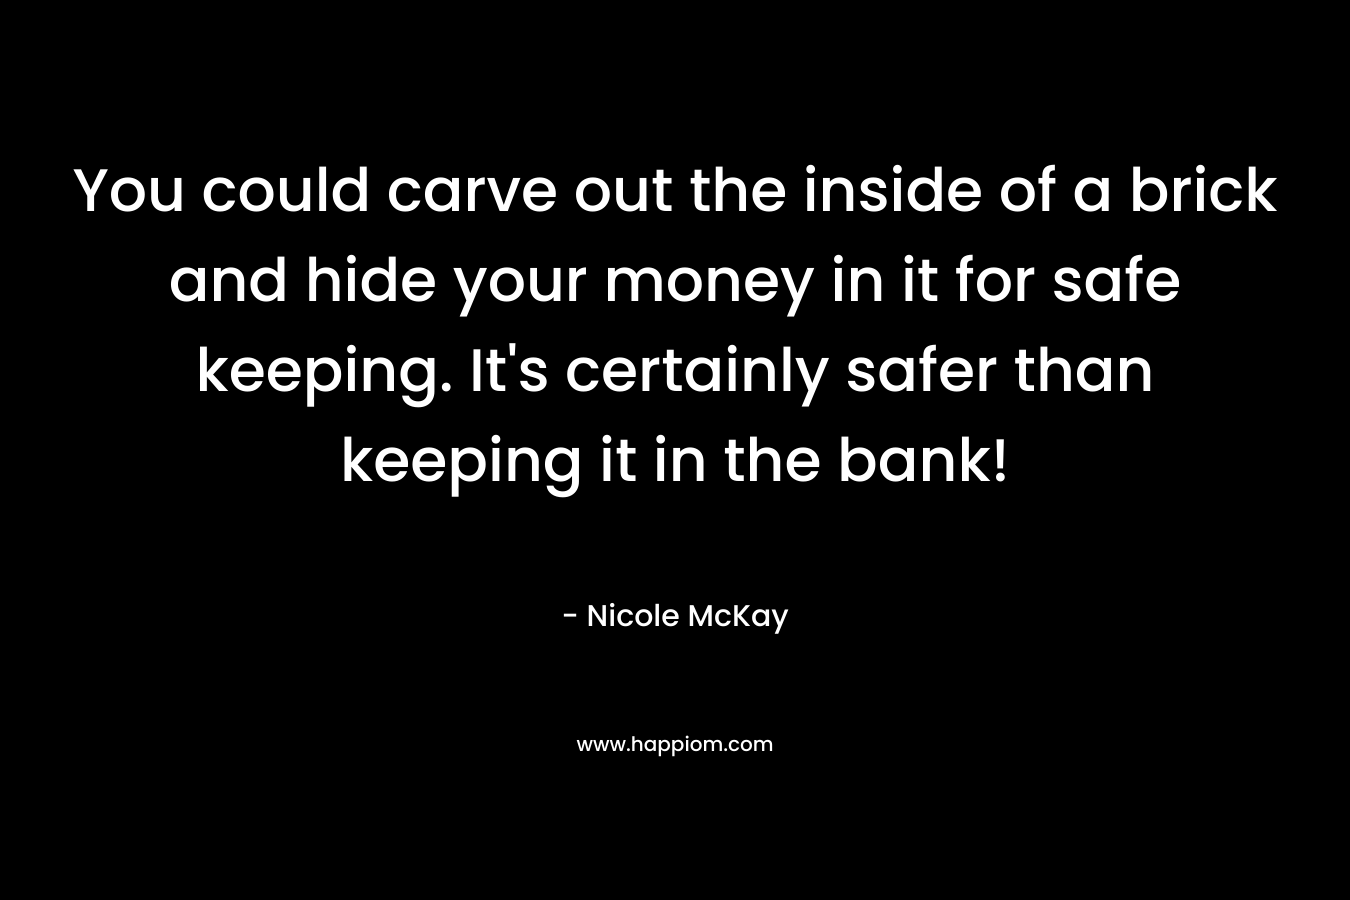 You could carve out the inside of a brick and hide your money in it for safe keeping. It's certainly safer than keeping it in the bank!